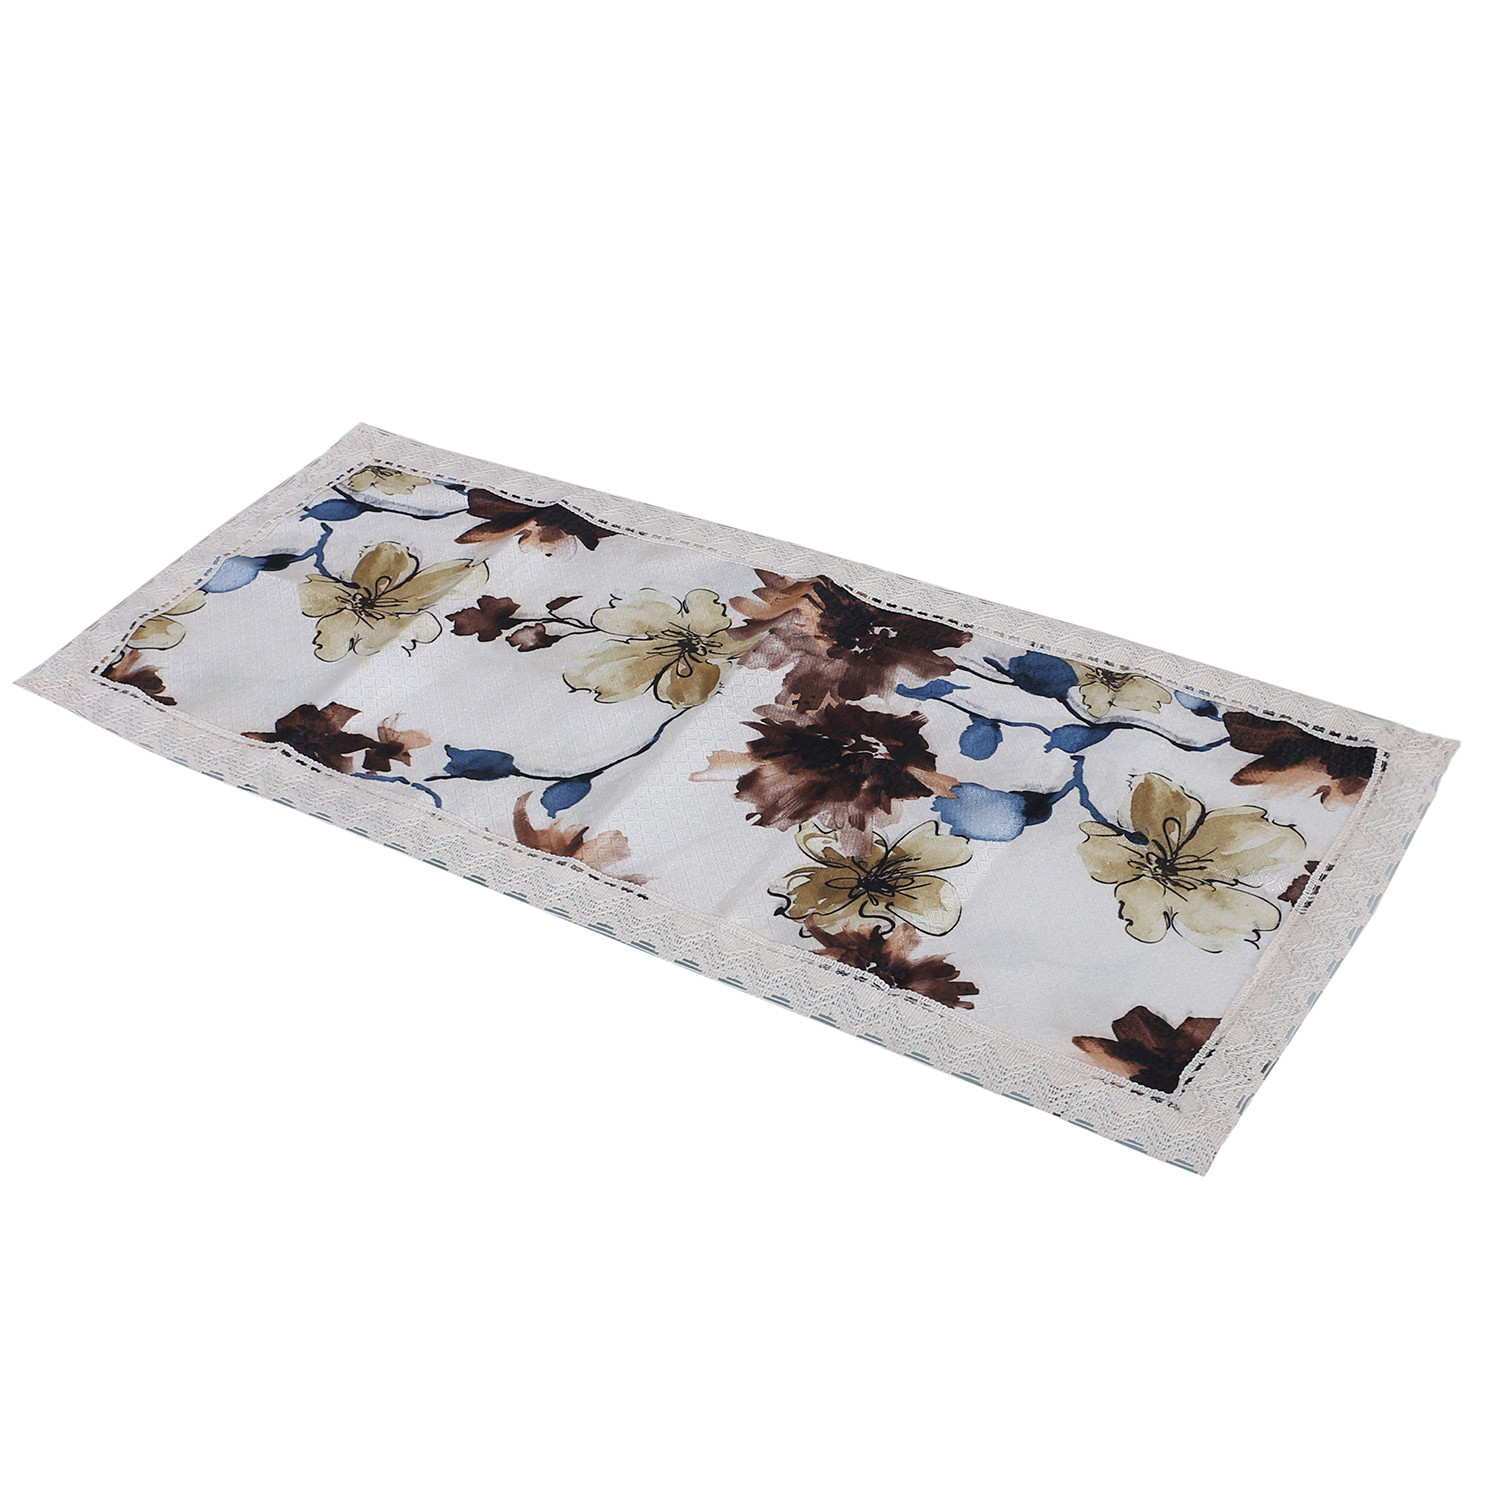 Kuber Industries Table Runner|Poly Cotton Decorative Floral Pattern|Tea Table Runner for Everyday Use With Jutelace Border, 34x16 Inch (Cream)